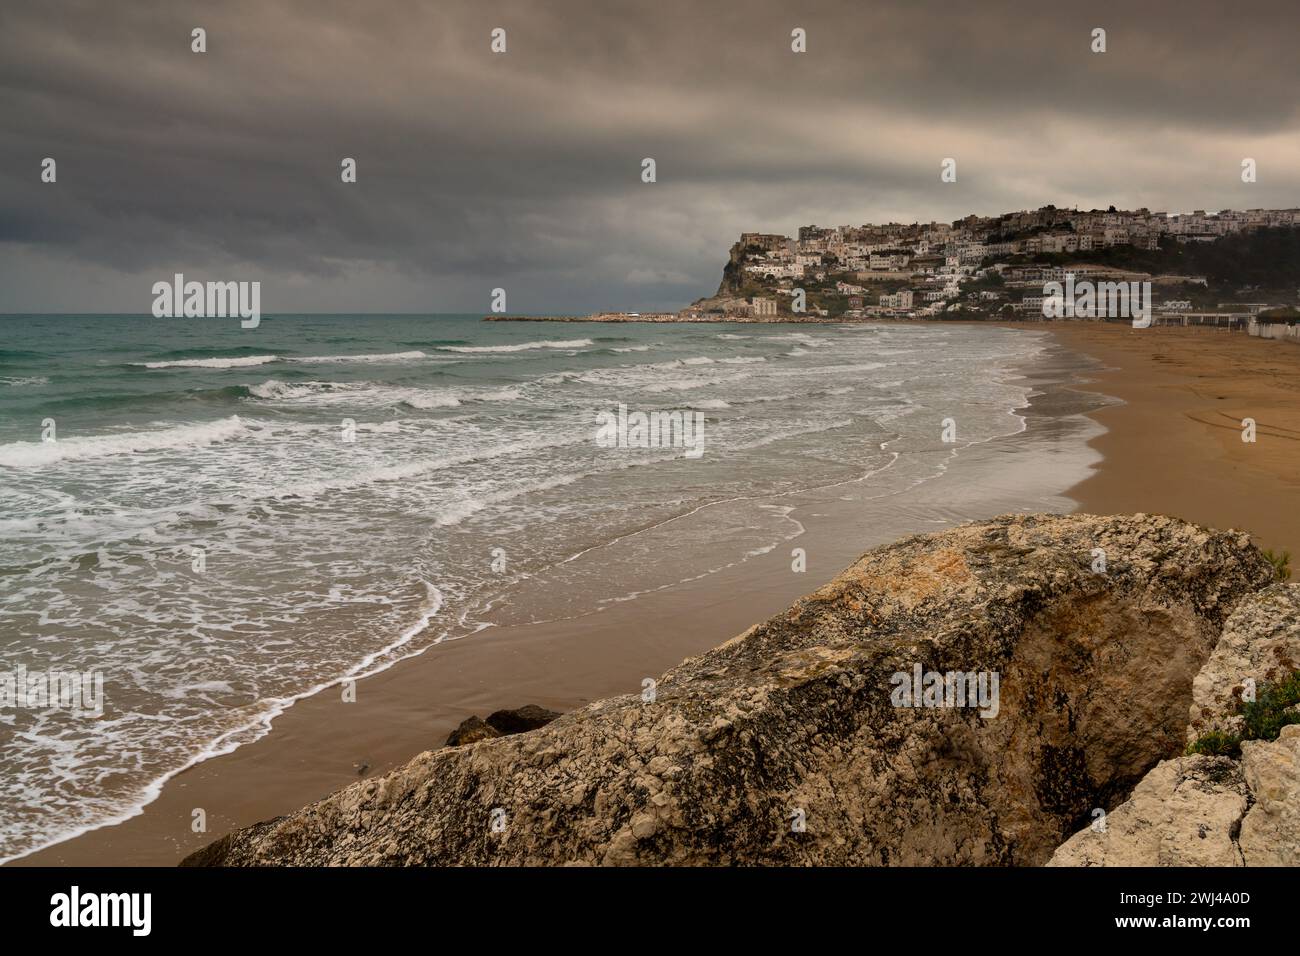 View of Peschici Bay and clifftop town under a rainy and overcast sky Stock Photo